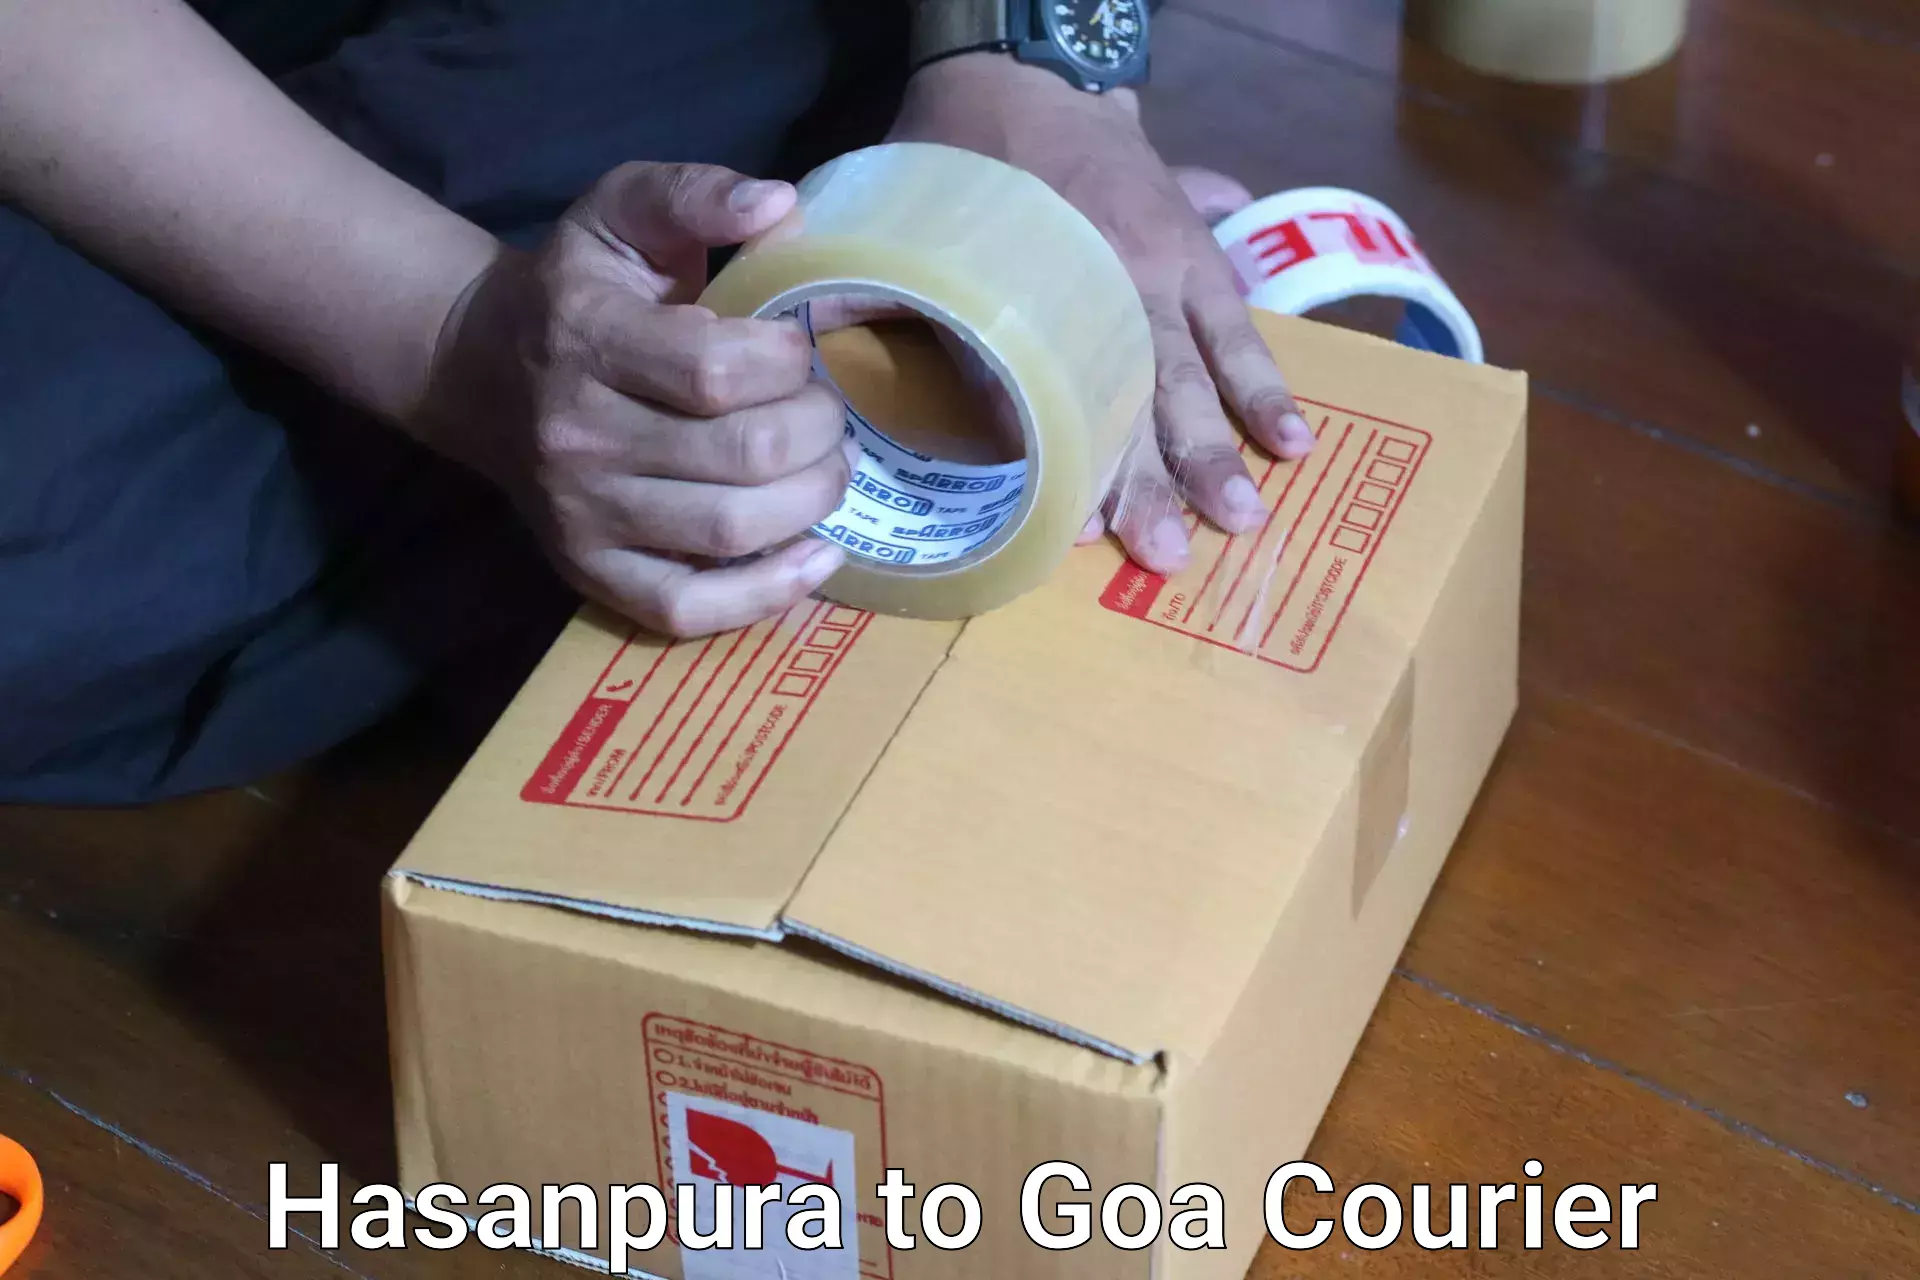 Luggage transport consulting Hasanpura to Goa